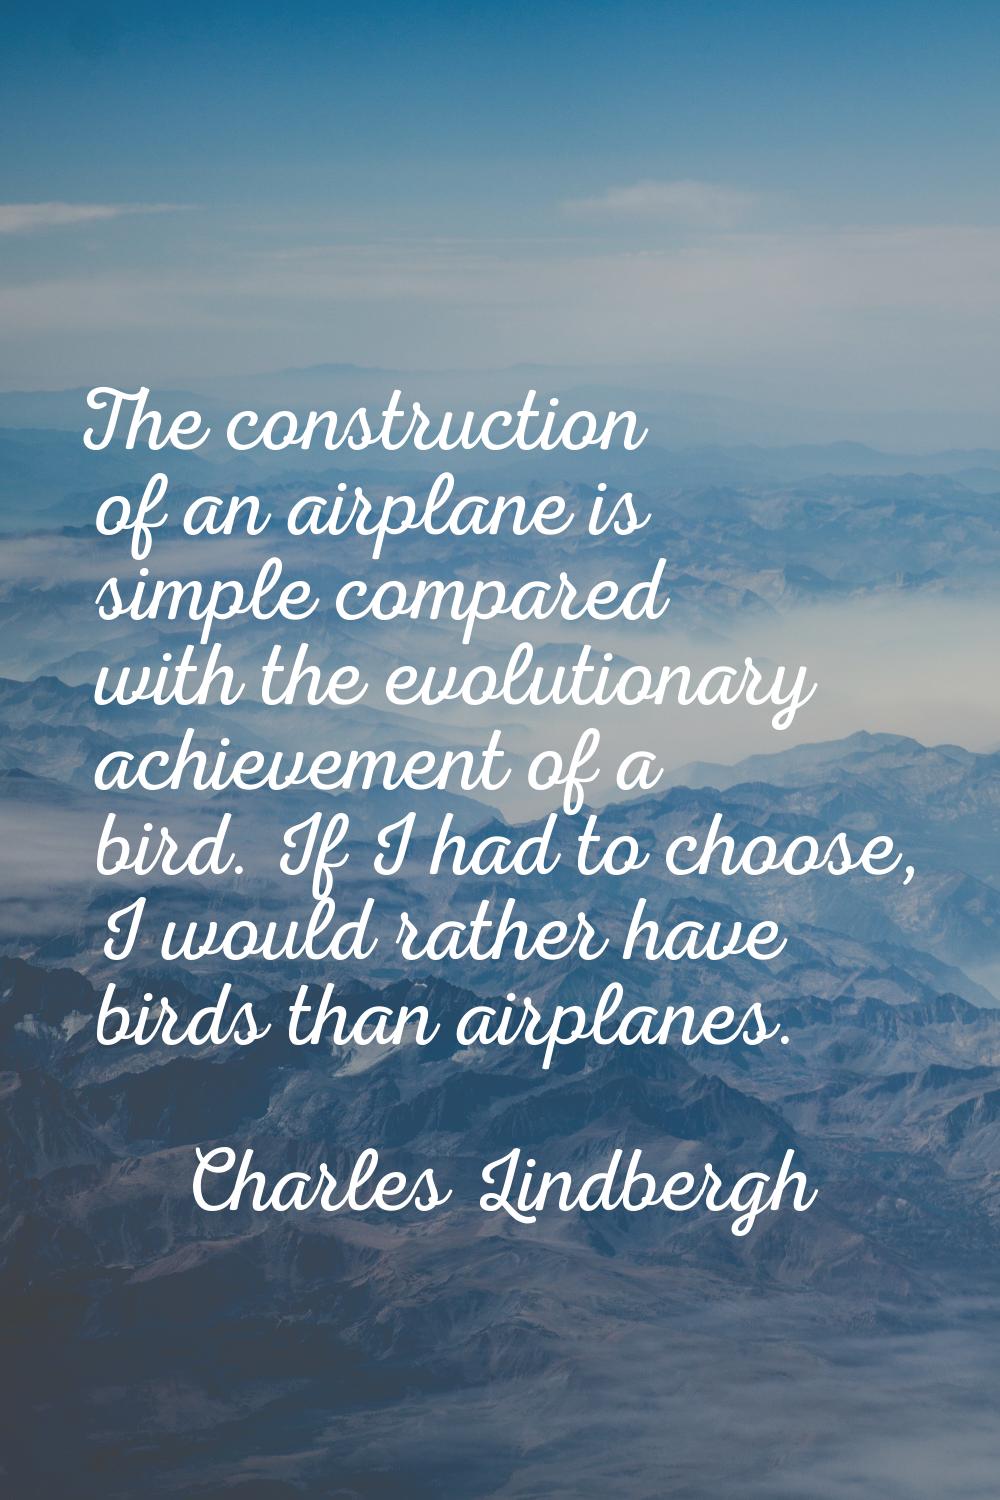 The construction of an airplane is simple compared with the evolutionary achievement of a bird. If 